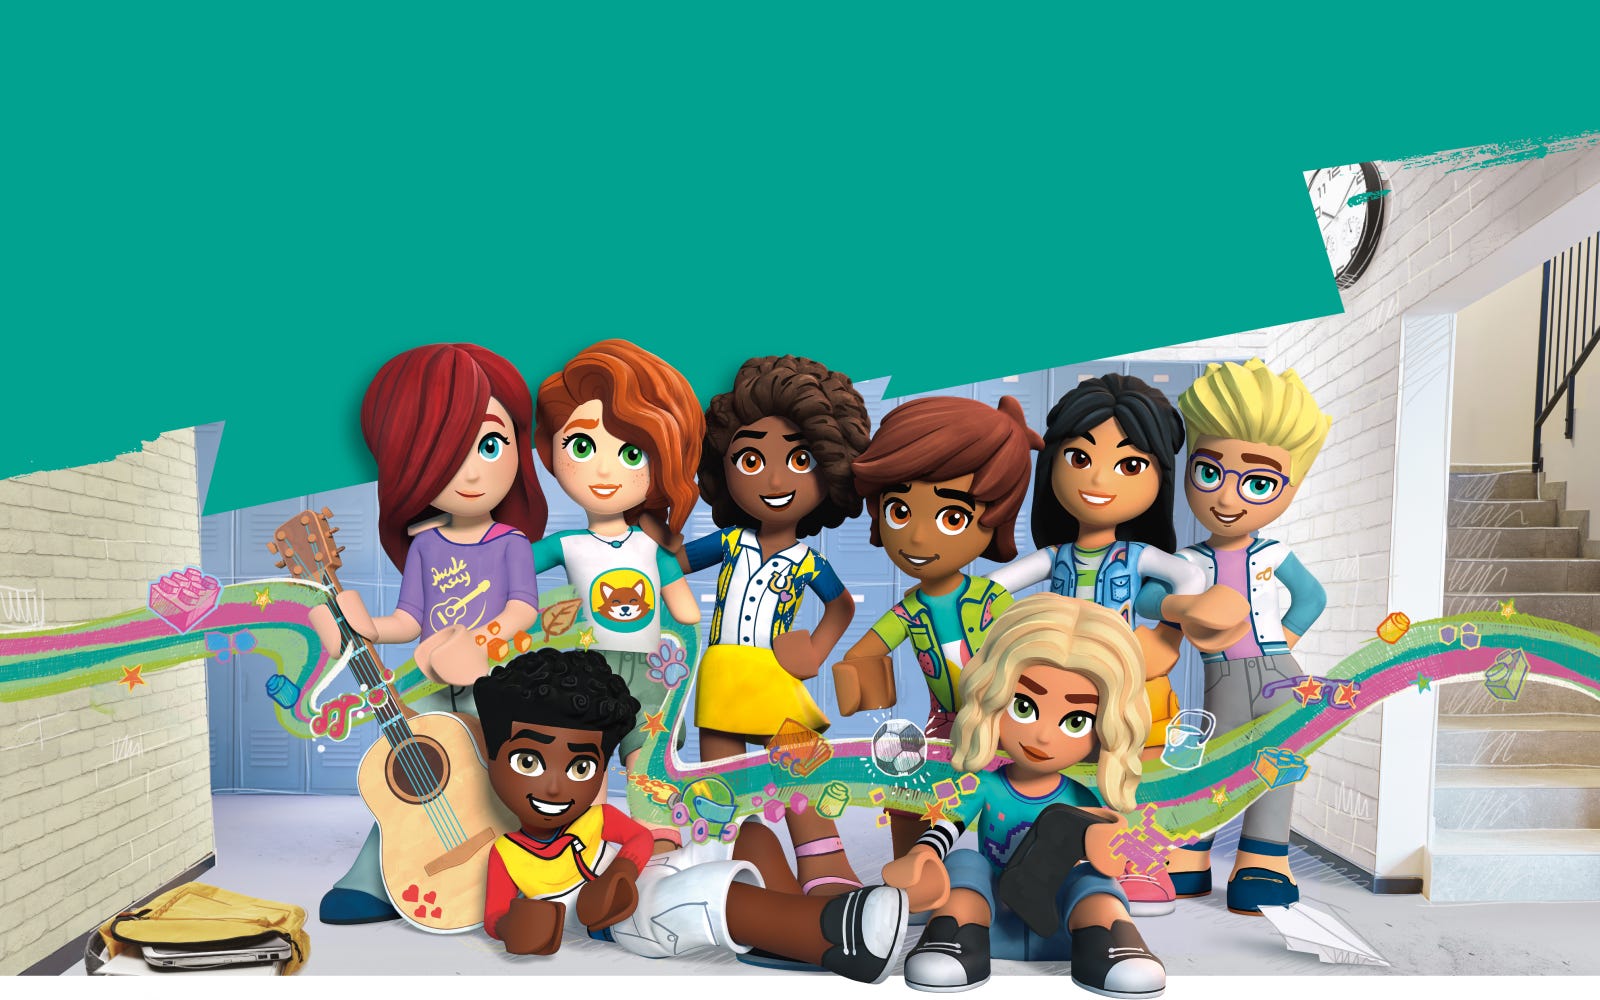 LEGO® Friends Introducing a world of friends | Official LEGO® Shop US